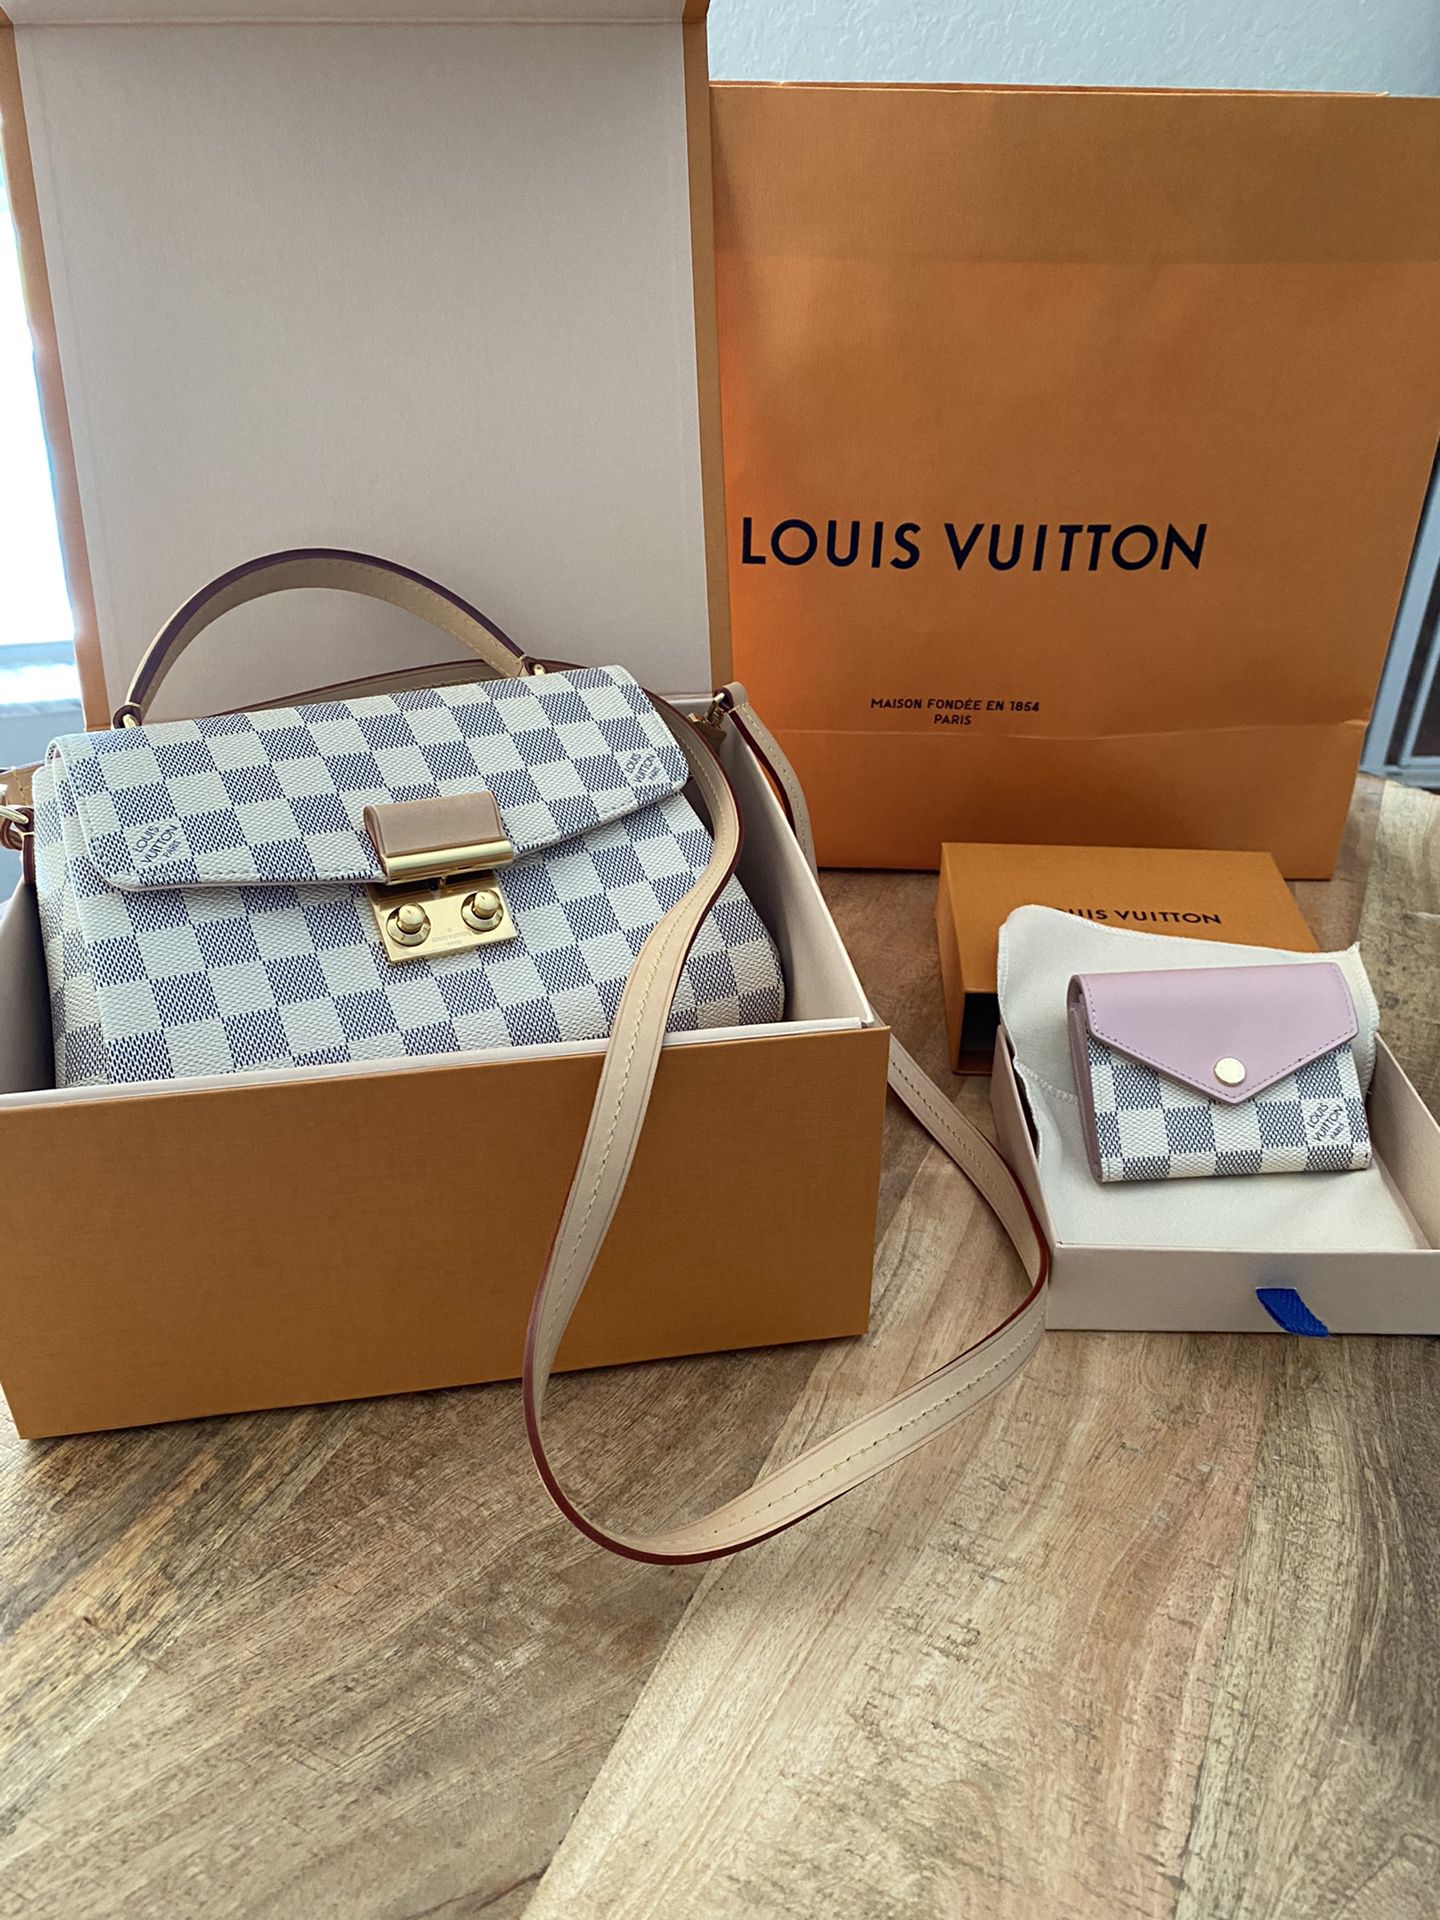 Louis Vuitton Crossbody Purse And Wallet for Sale in Brooksville, FL